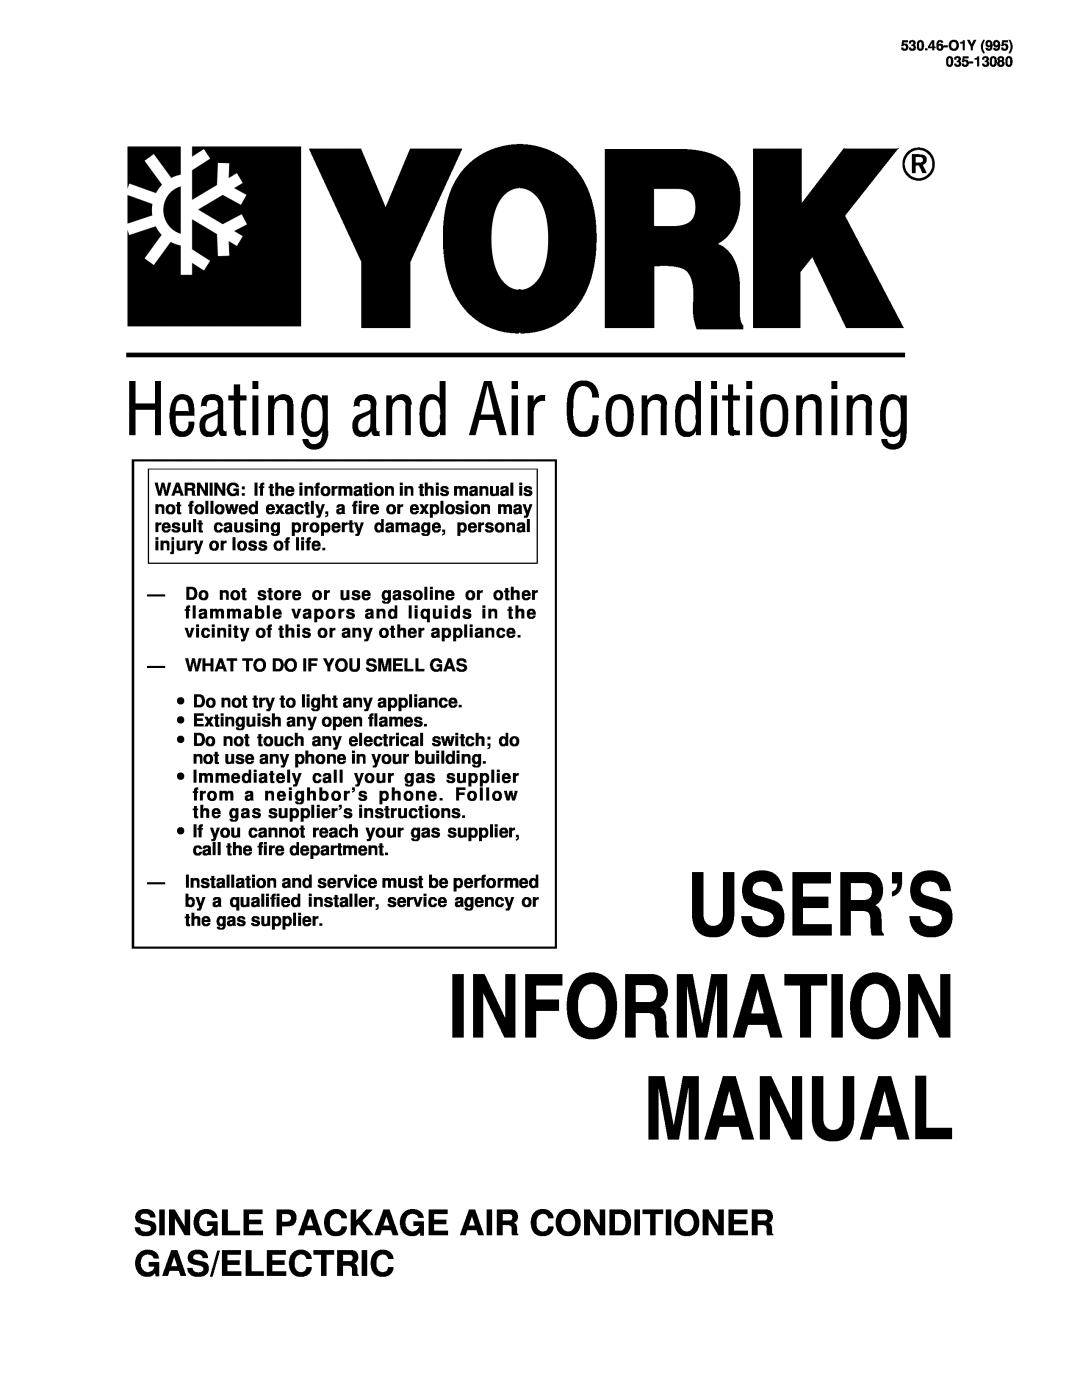 York Heating & AIR CONDITIONER manual Information, User’S, Manual, Single Package Air Conditioner Gas/Electric 